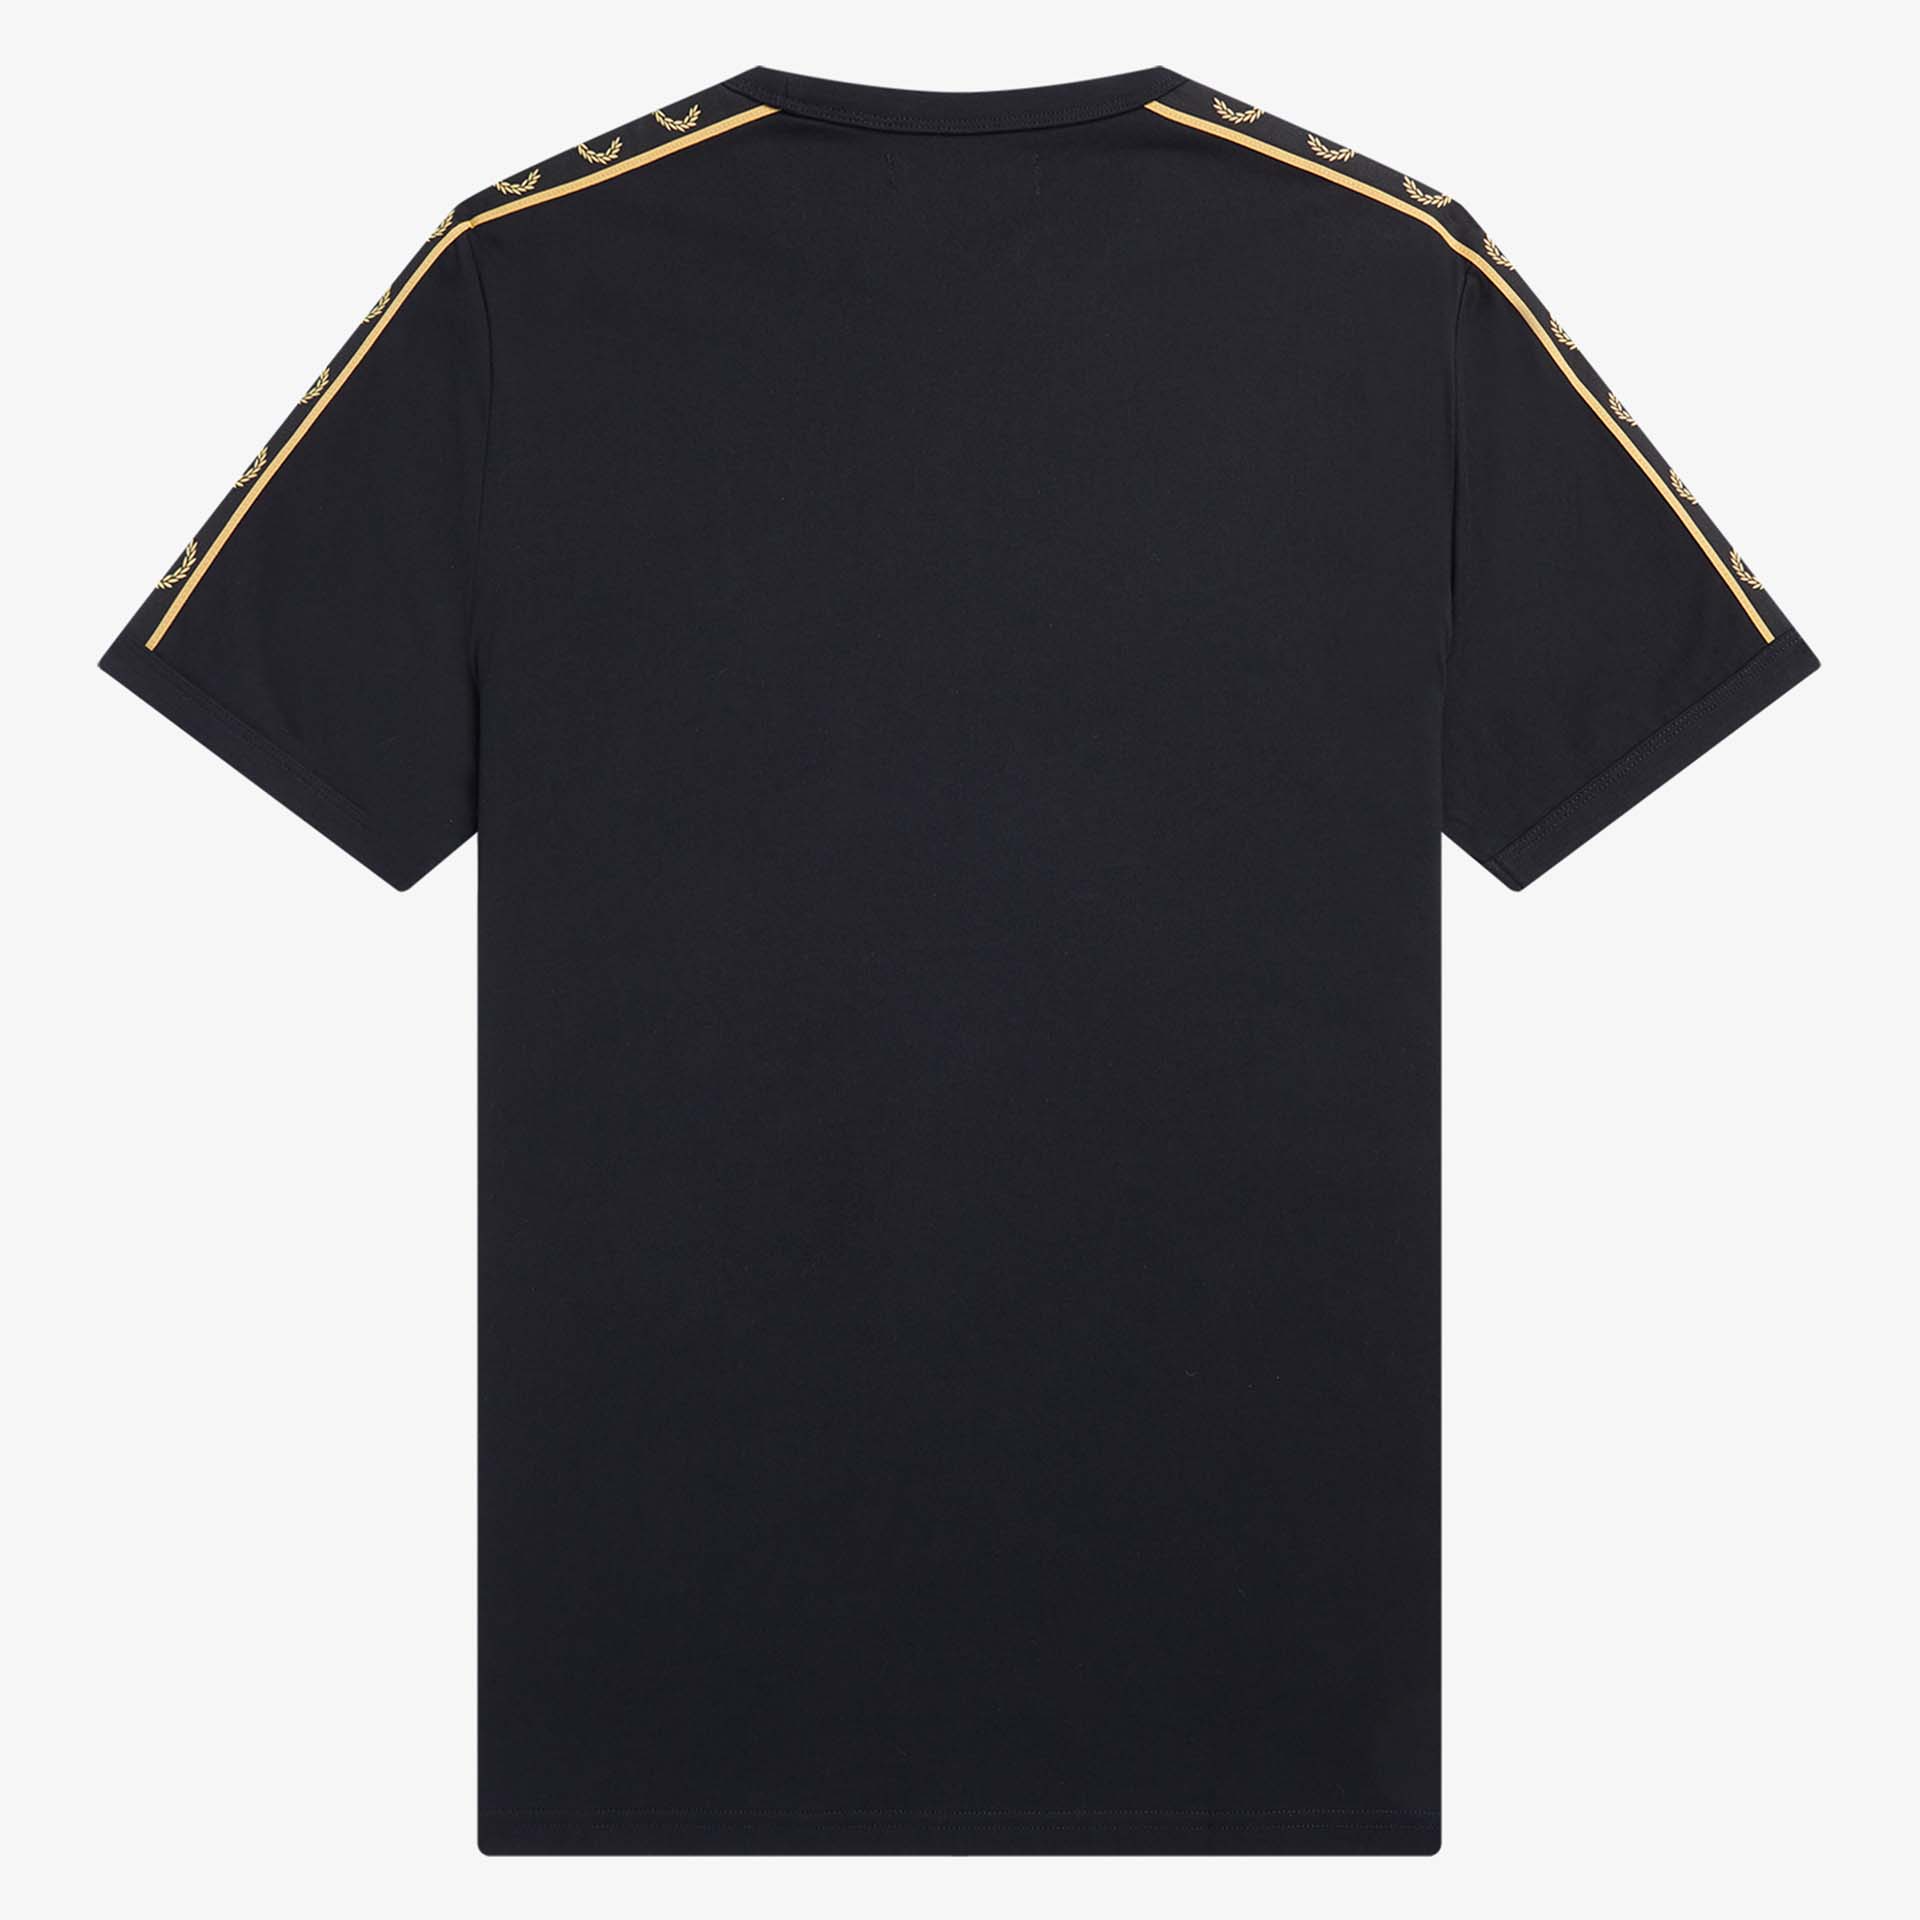 Fred Perry Contrast Ringer T-Shirt Black/1964 Gold